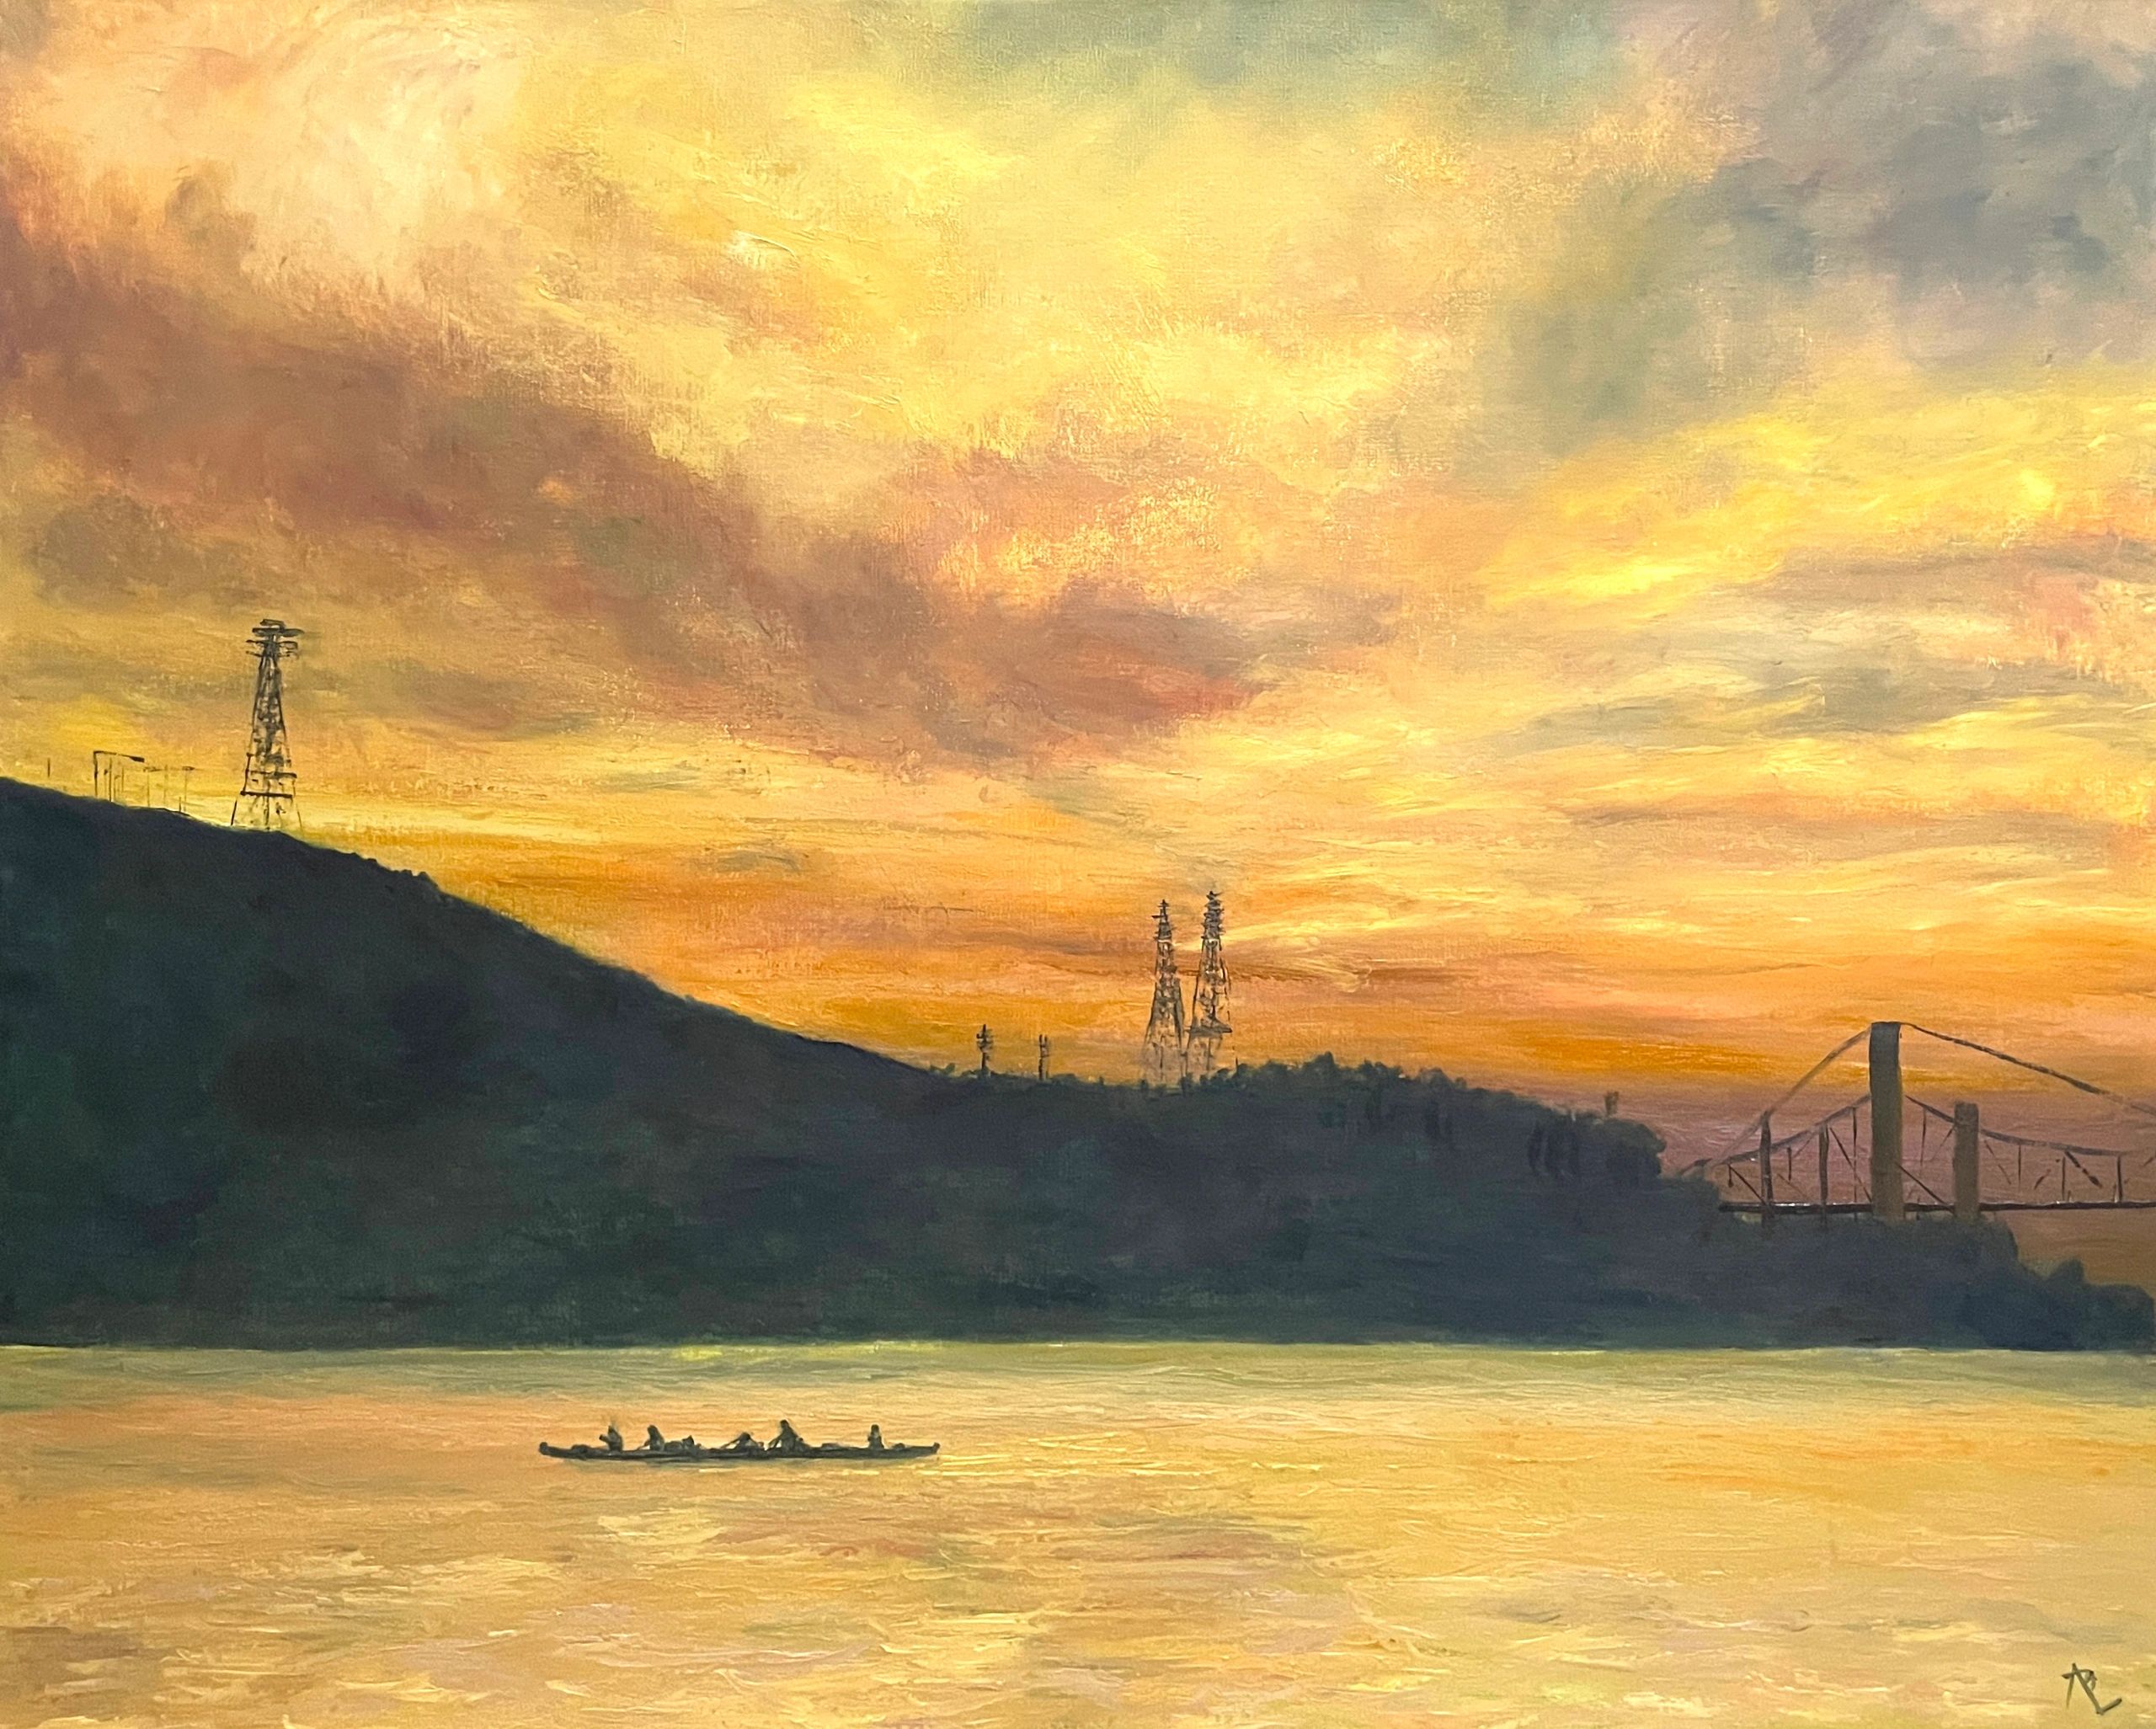 Canoe paddles on the Carquinez Strait in N CA, towards the end of a picturesque late winter day.